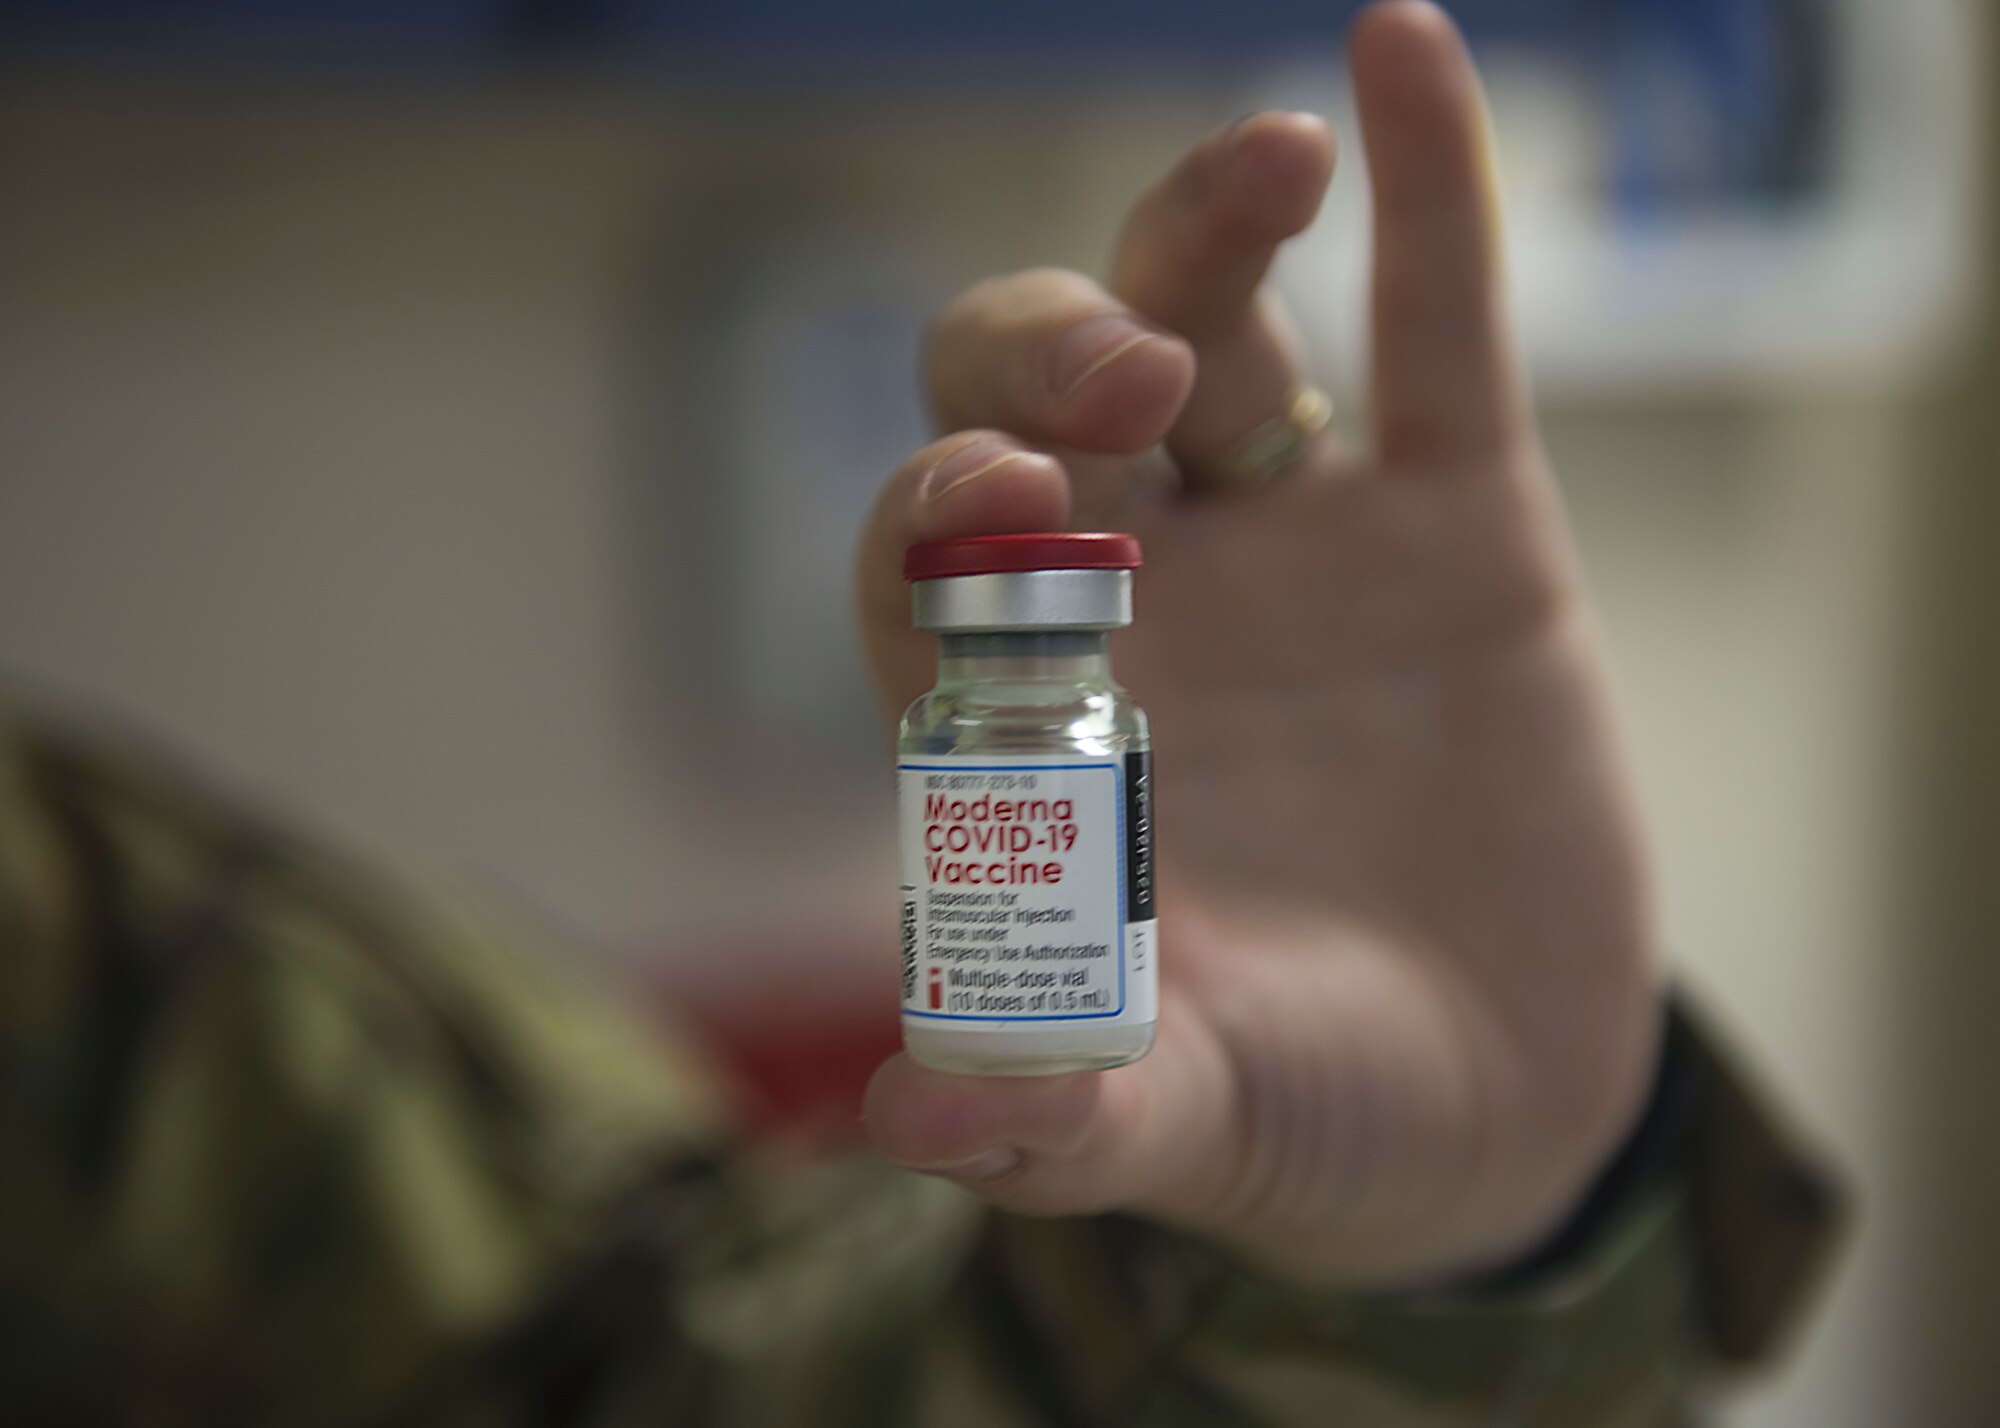 A 35th Medical Group Airman holds a dosage of the COVID-19 vaccine in preparation to deliver it to mission essential personnel at Misawa Air Base, Japan, Dec. 28, 2020. The 35th MDG Public Health office will notify the base population when the vaccine is available for distribution to additional service members, government civilians, dependents and Department of Defense beneficiaries at Misawa AB. (U.S. Air Force photo by Airman 1st Class Leon Redfern)